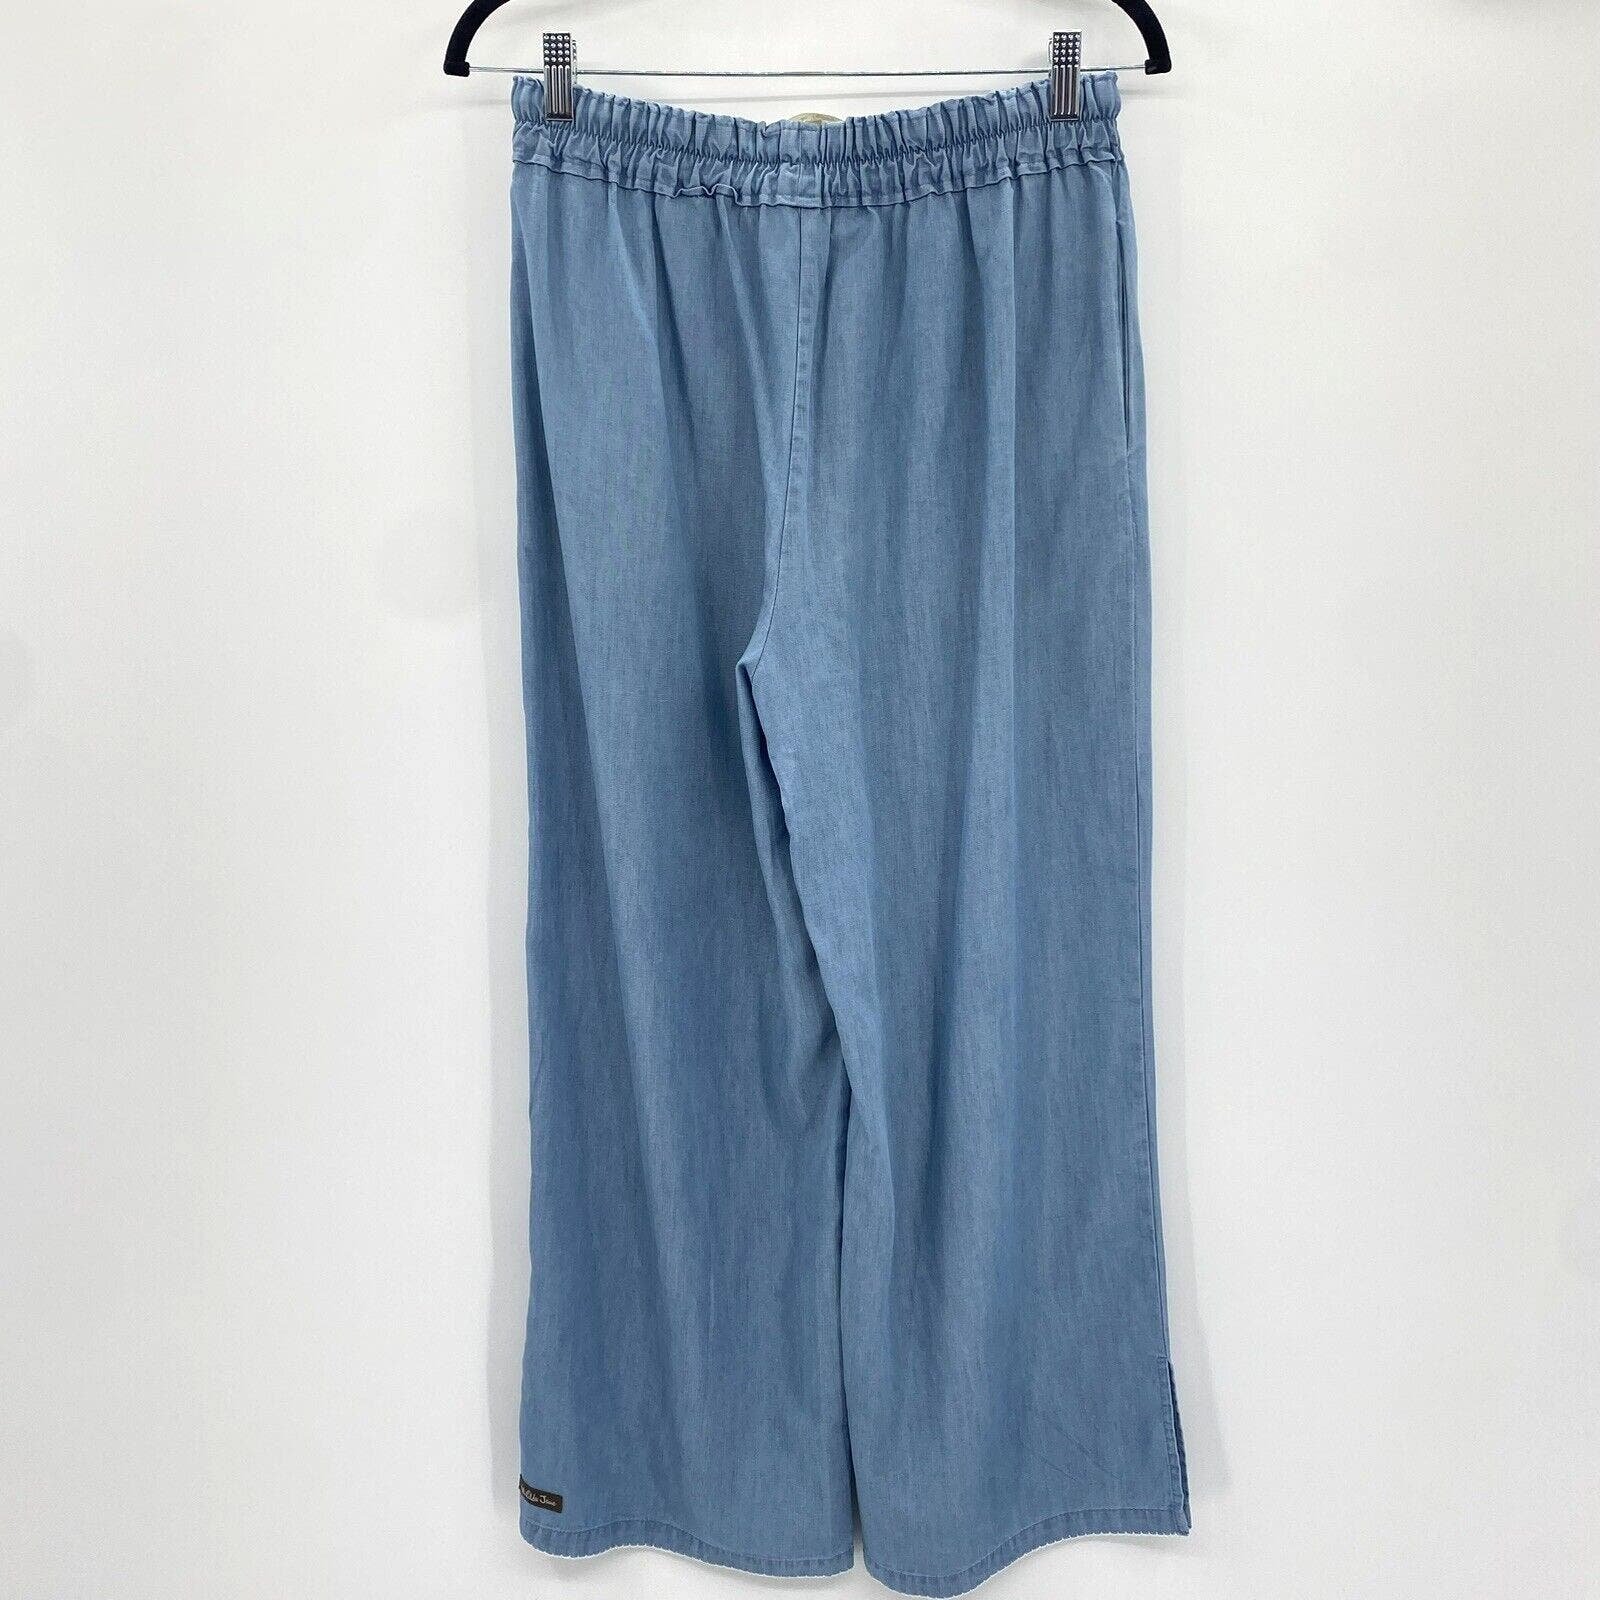 good price Matilda Jane Women´s On The Shore Cropped Chambray Pants Size S Blue Pull On oMBtr5lUs Zero Profit 